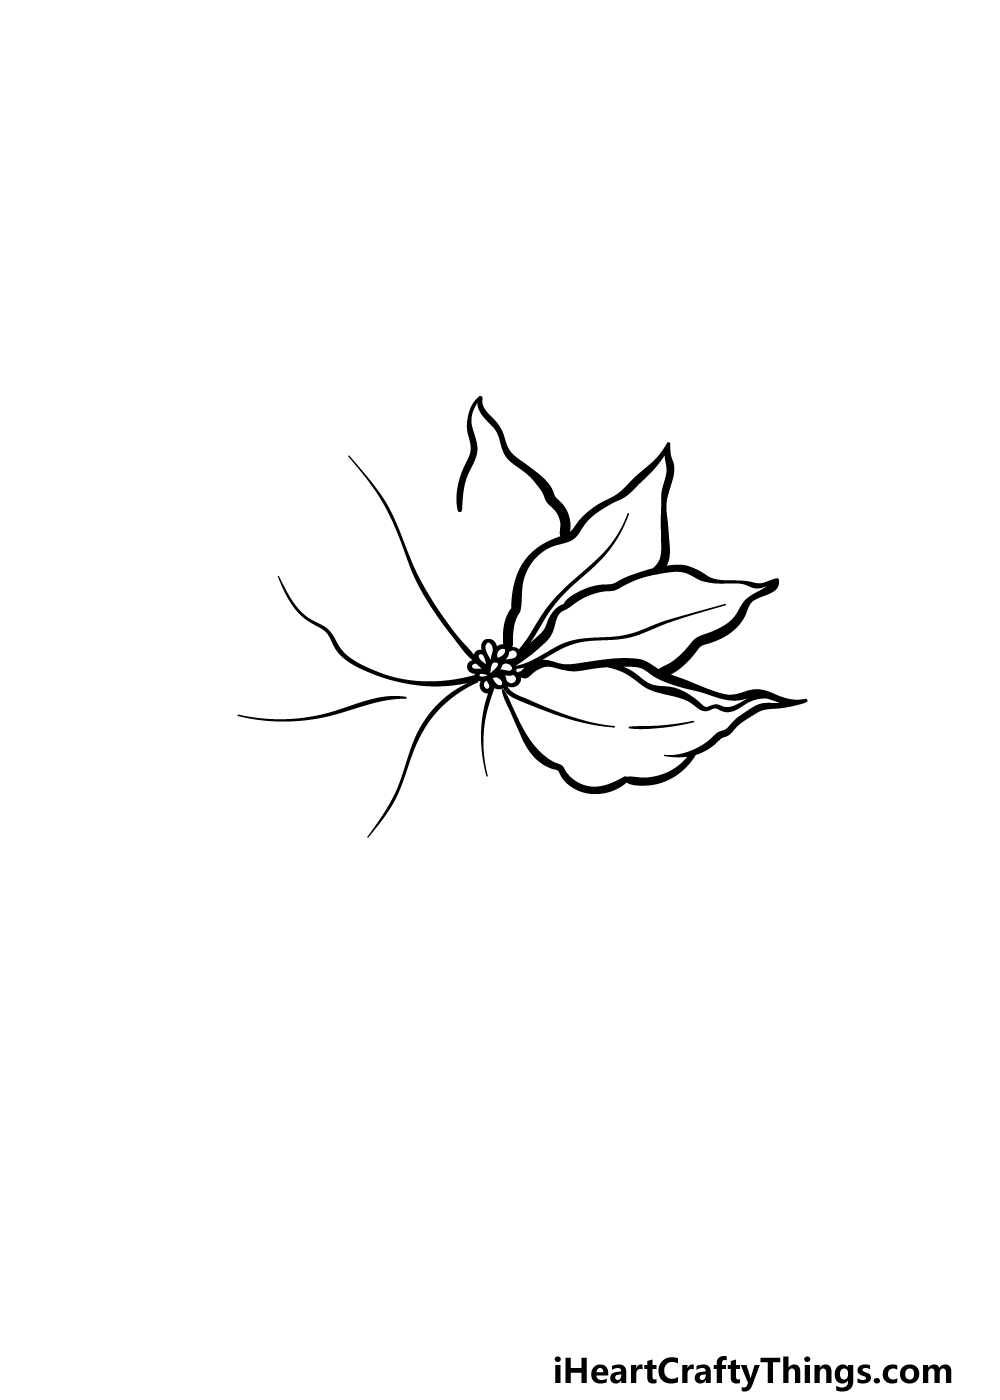 drawing poinsettia step 2